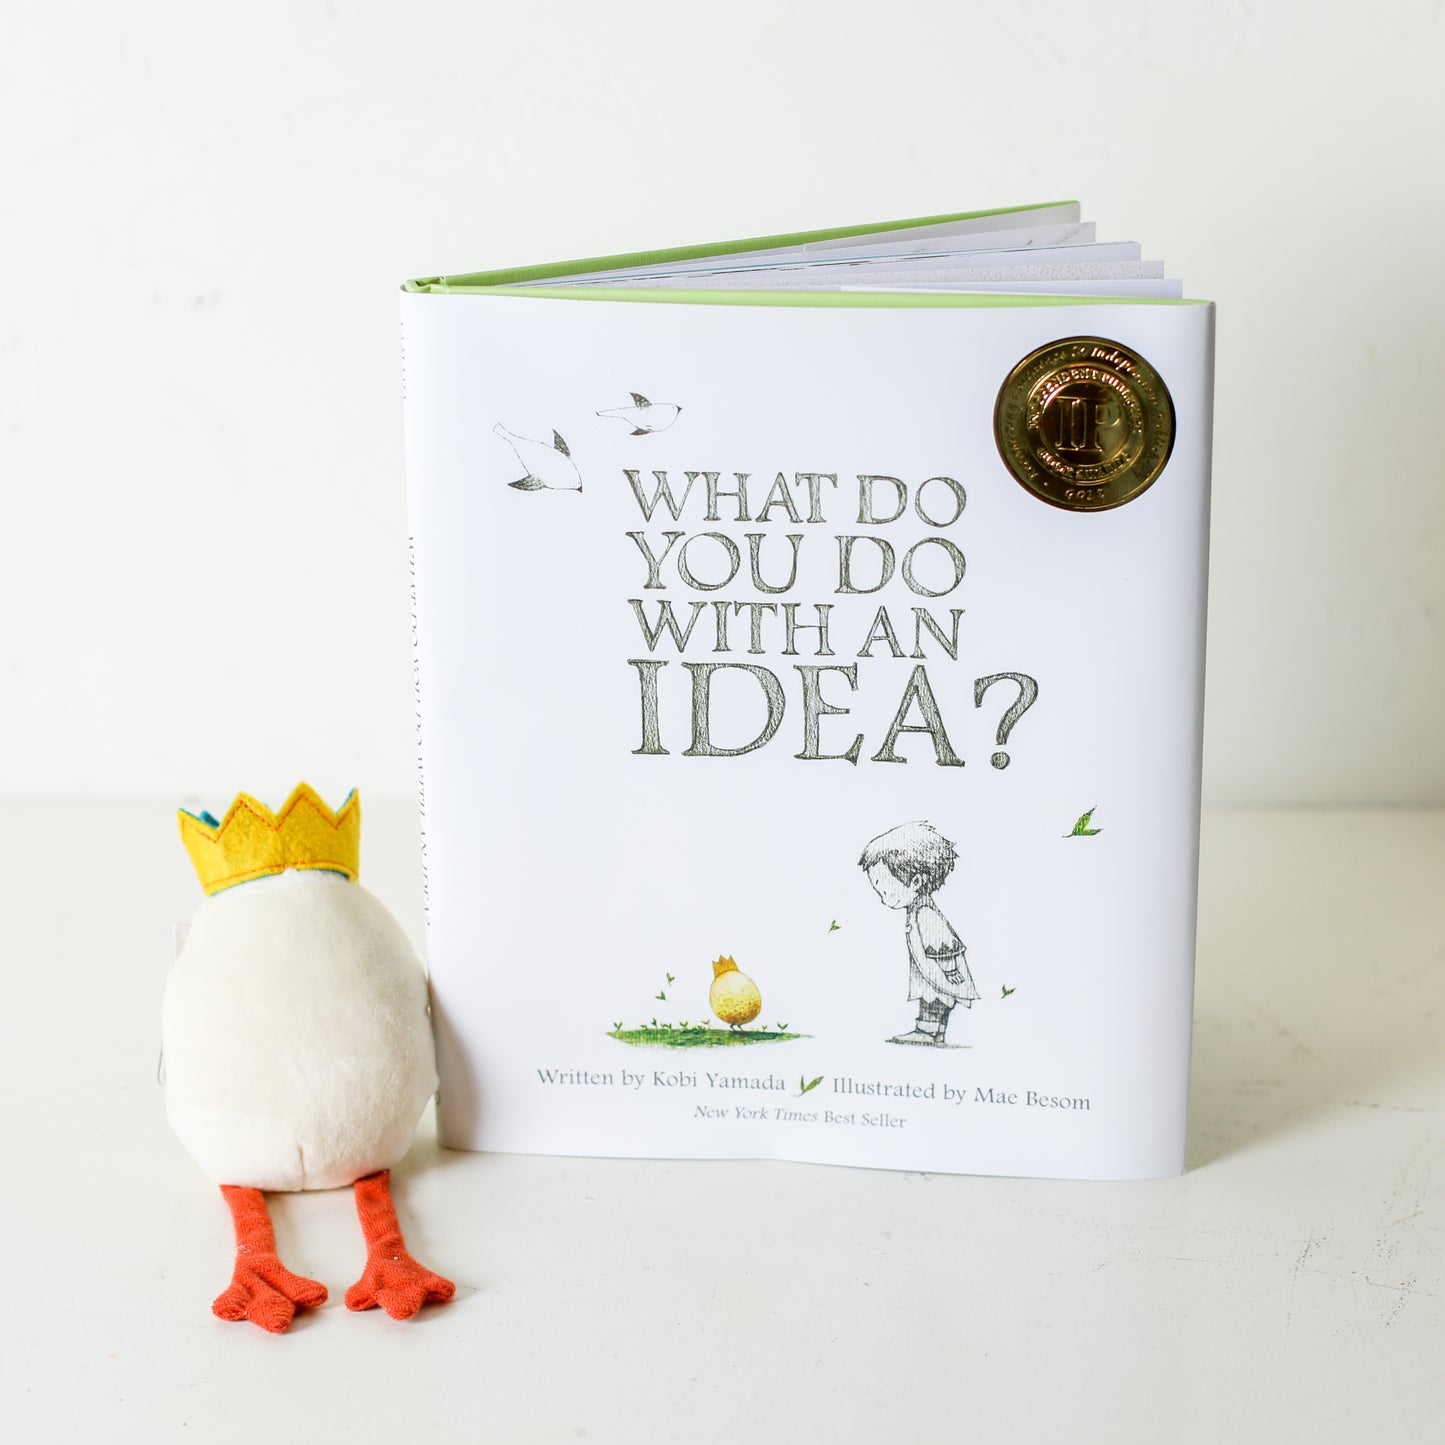 "What Do You Do with an Idea?" Boxed Book Set